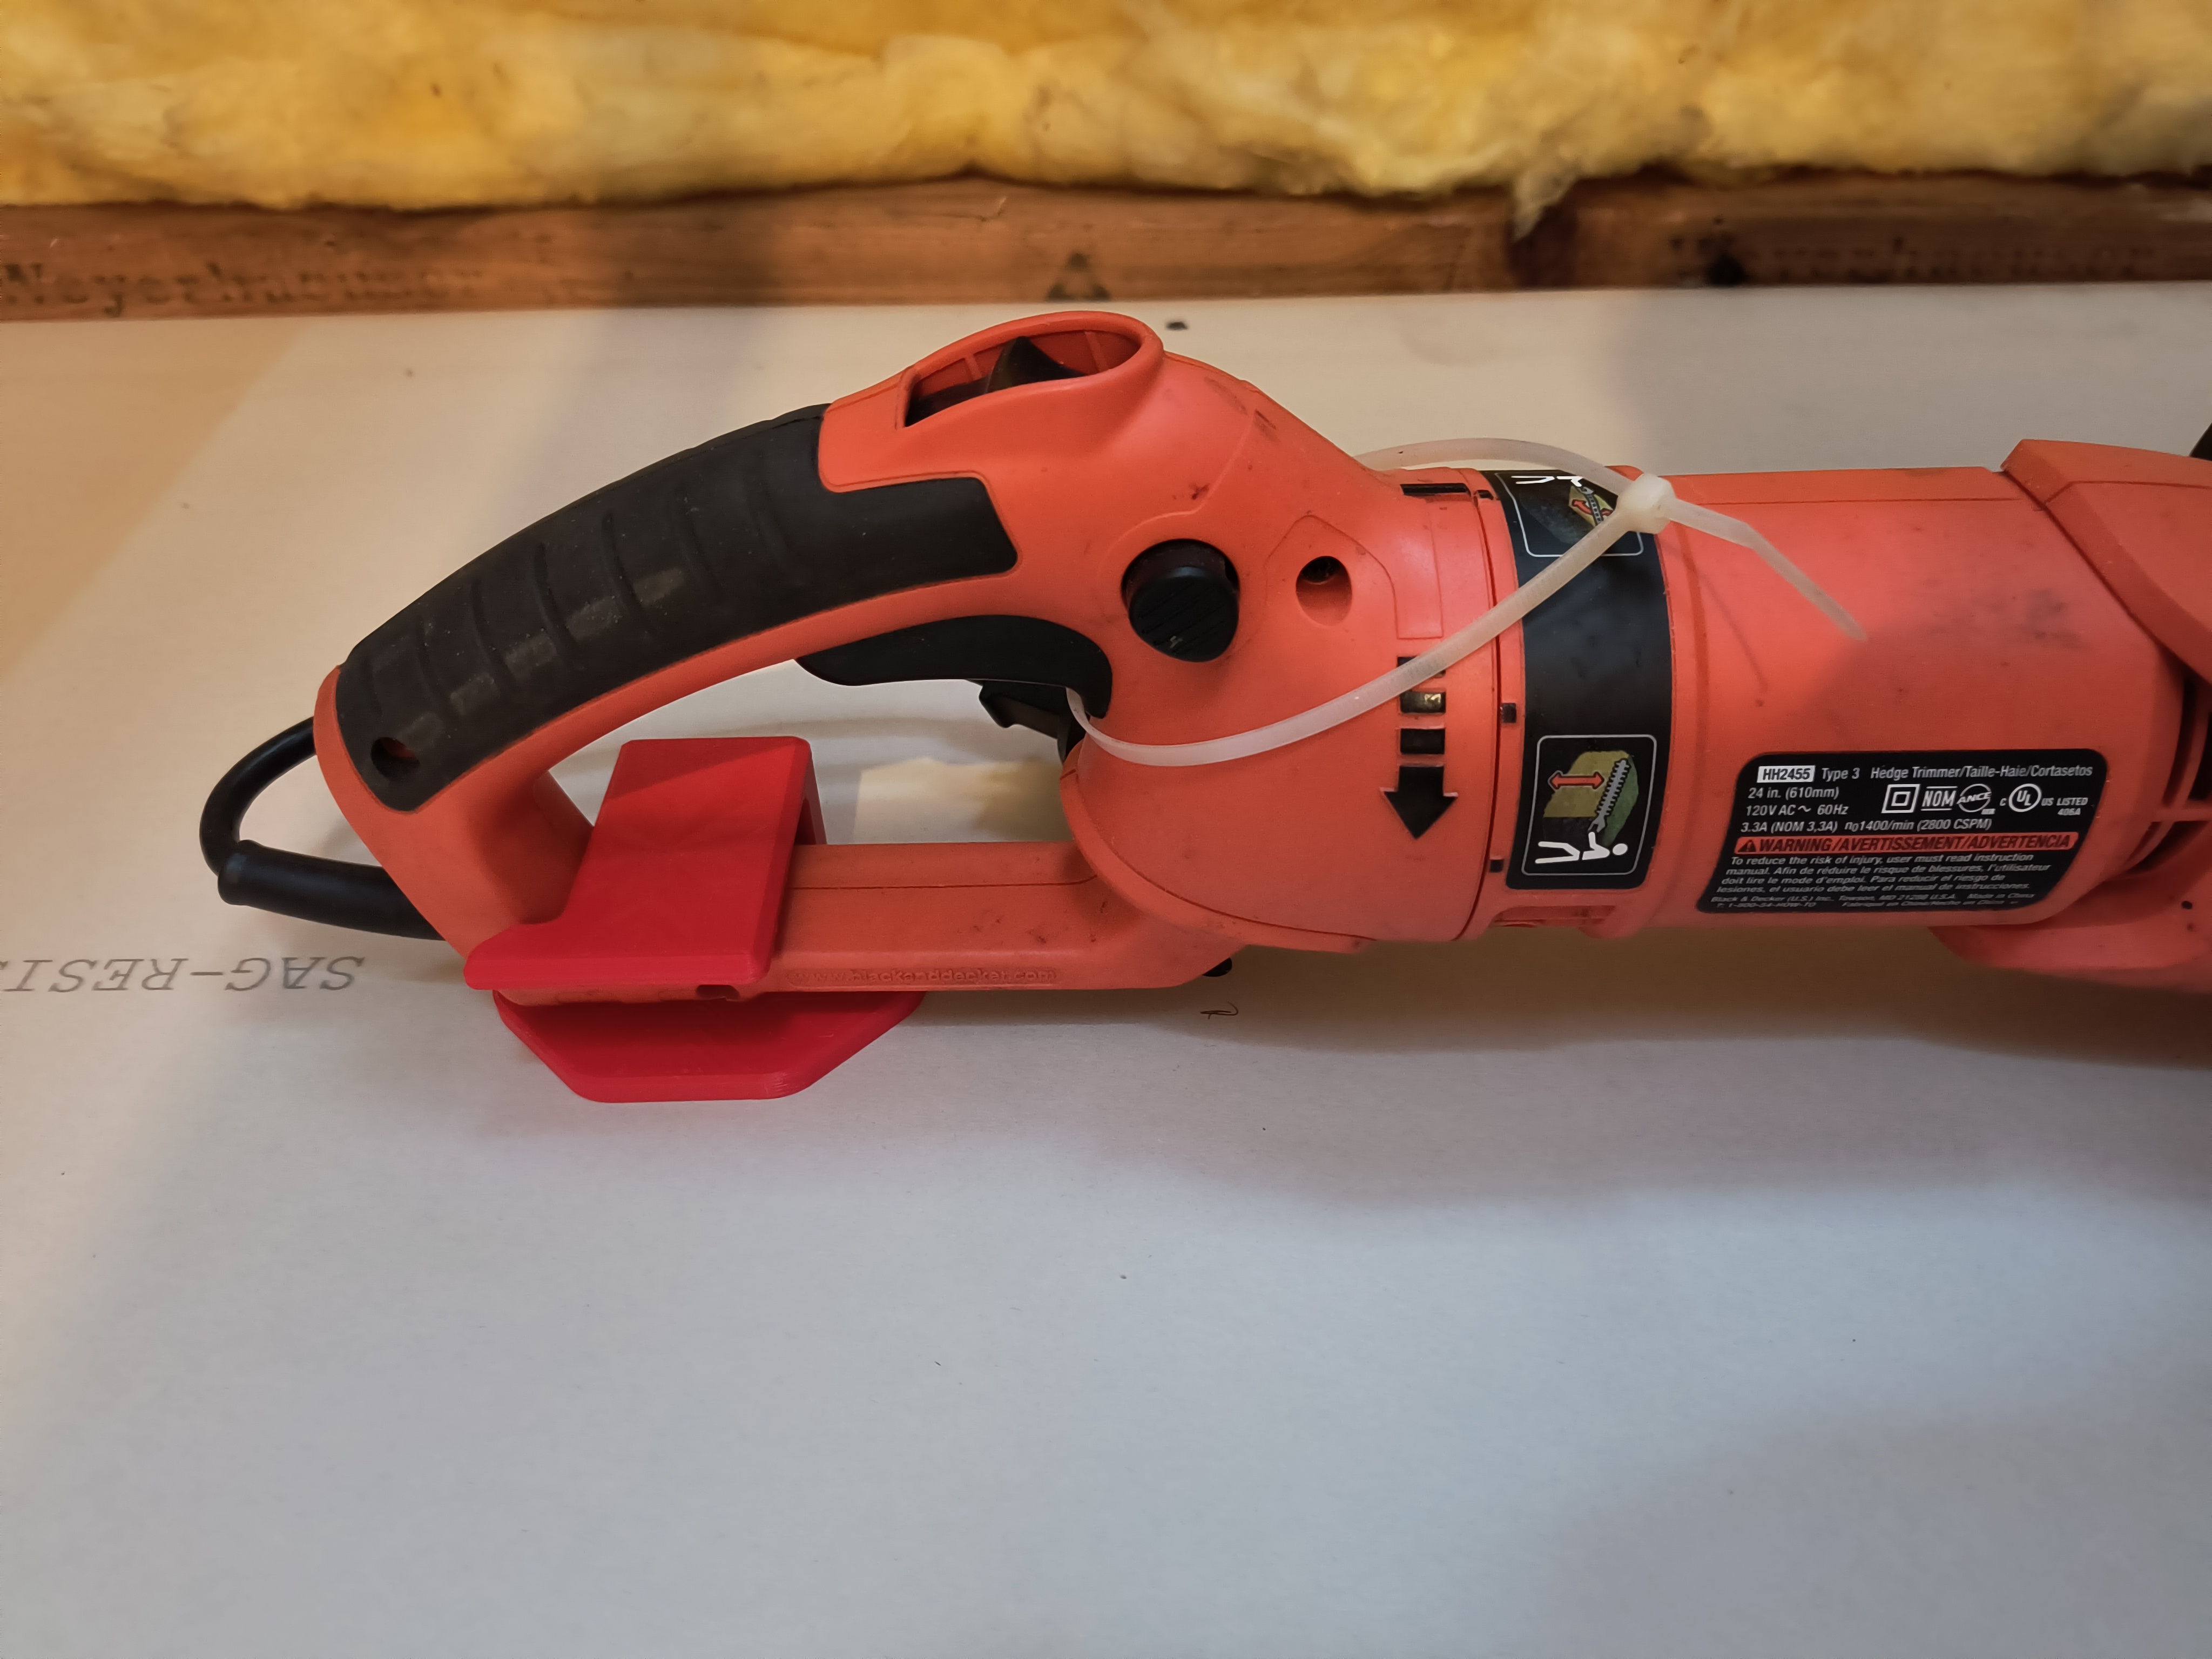 Black & Decker HH2455 Corded Hedge Trimmer Review 